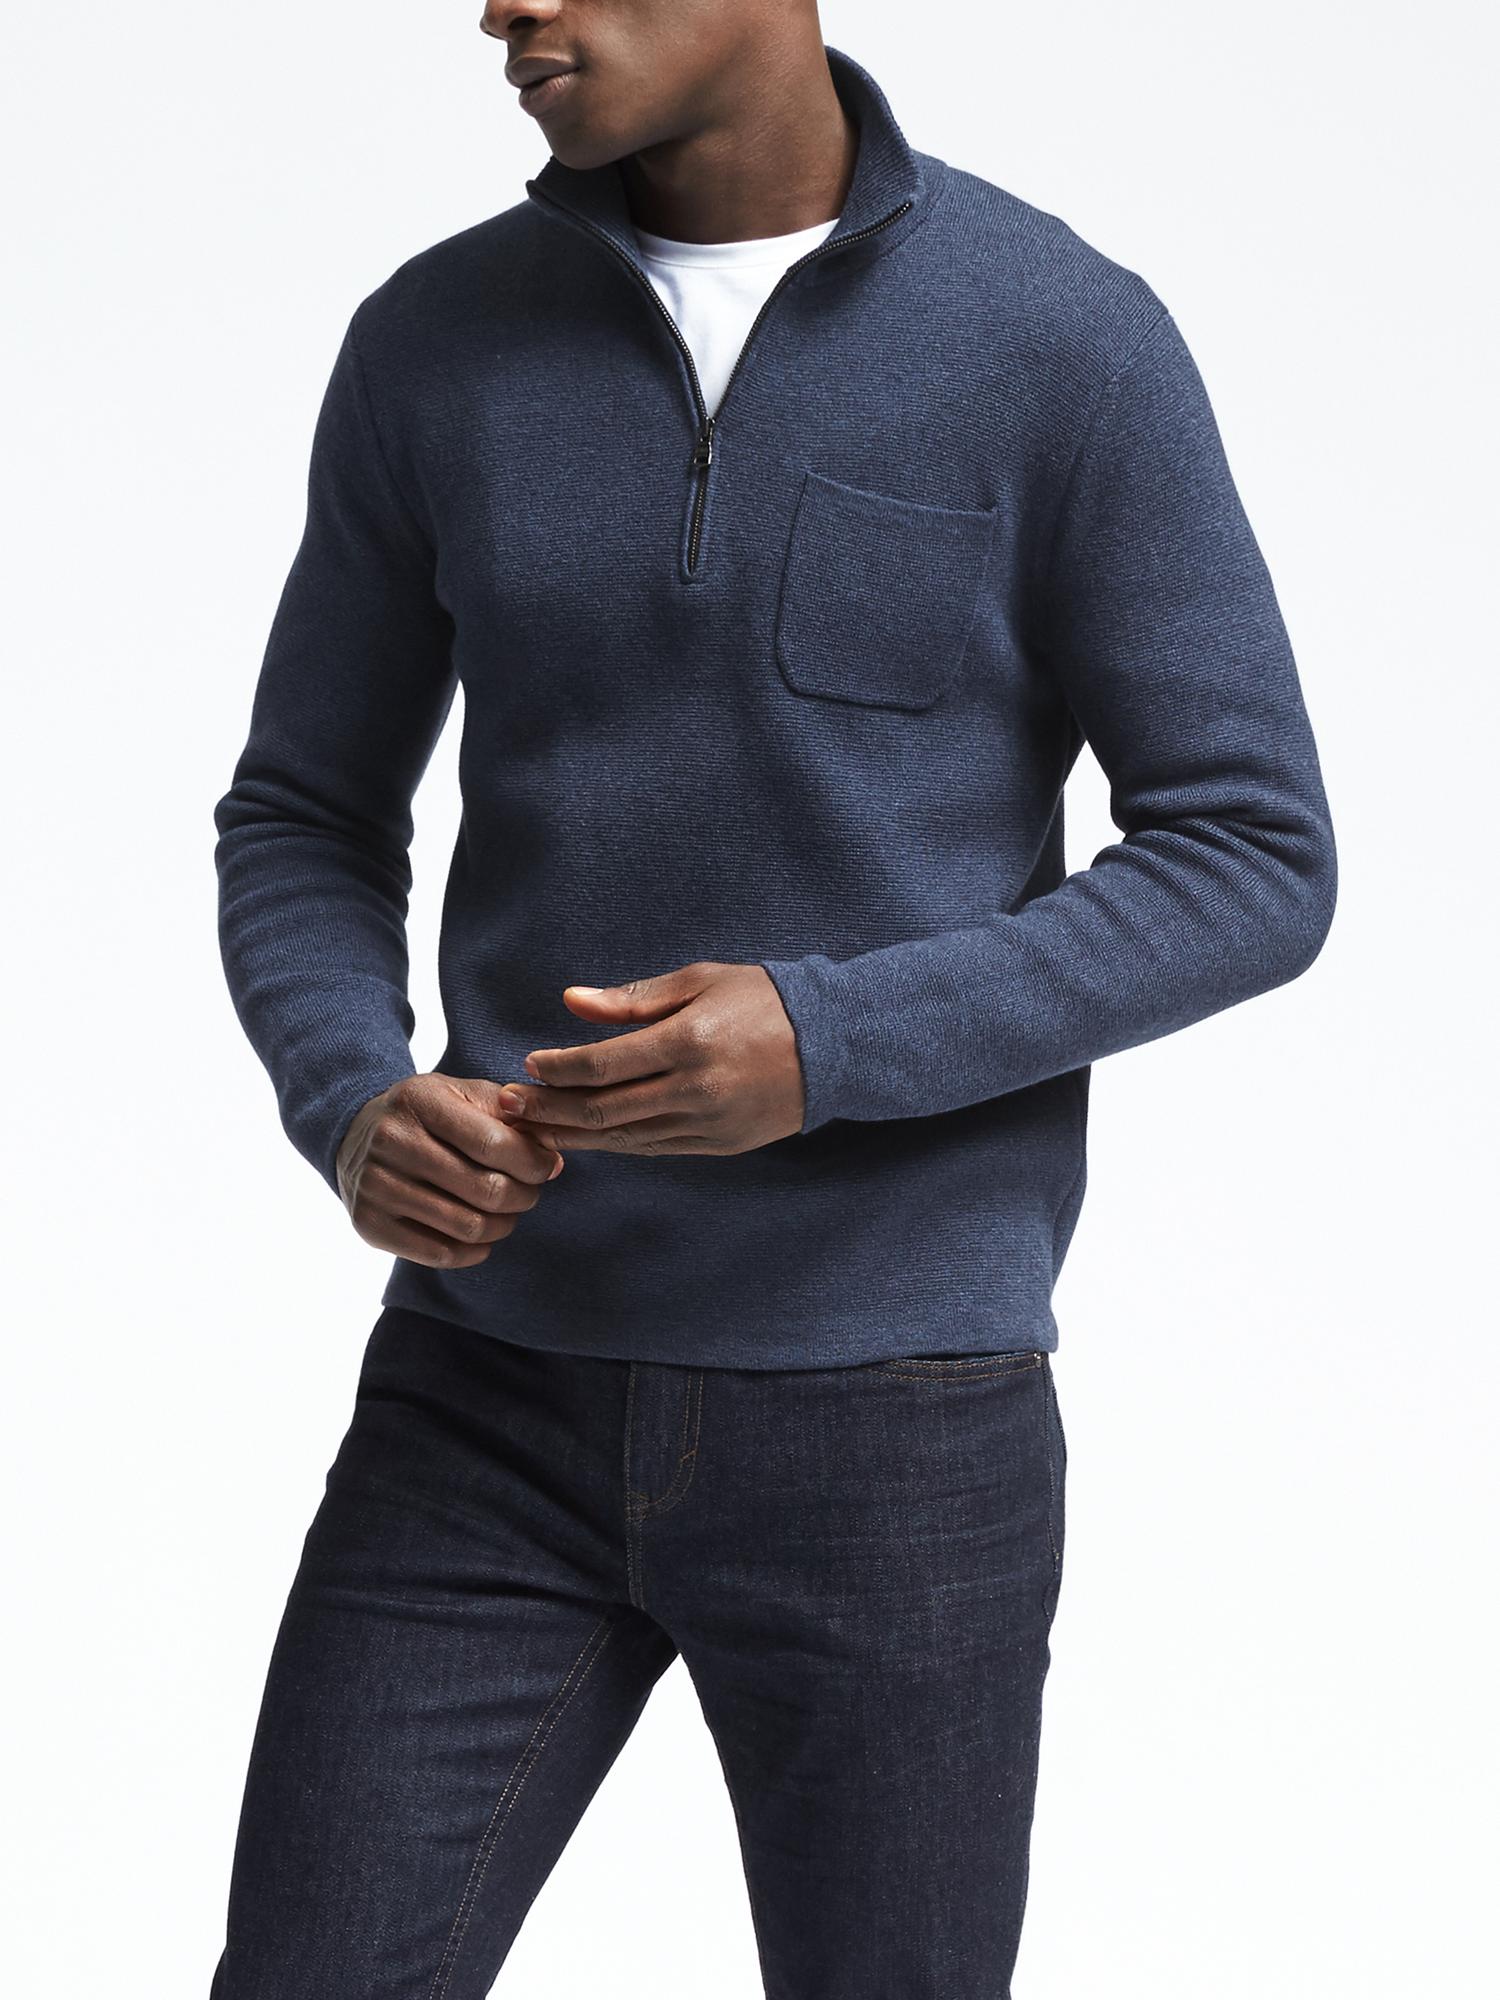 Half-Zip Pullover With COOLMAX® Technology